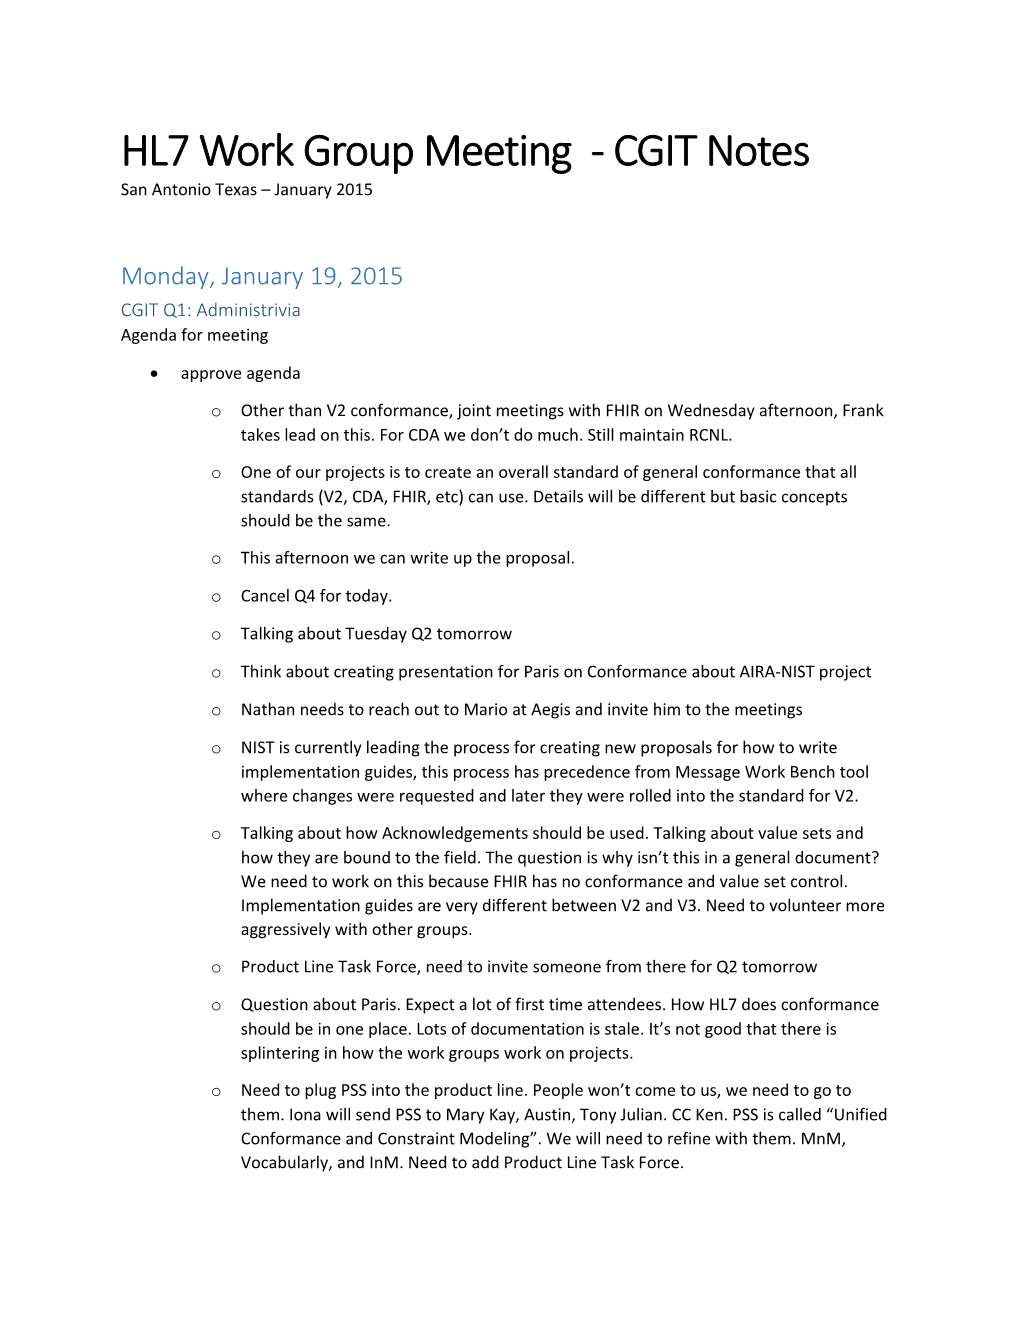 HL7 Work Group Meeting - CGIT Notes